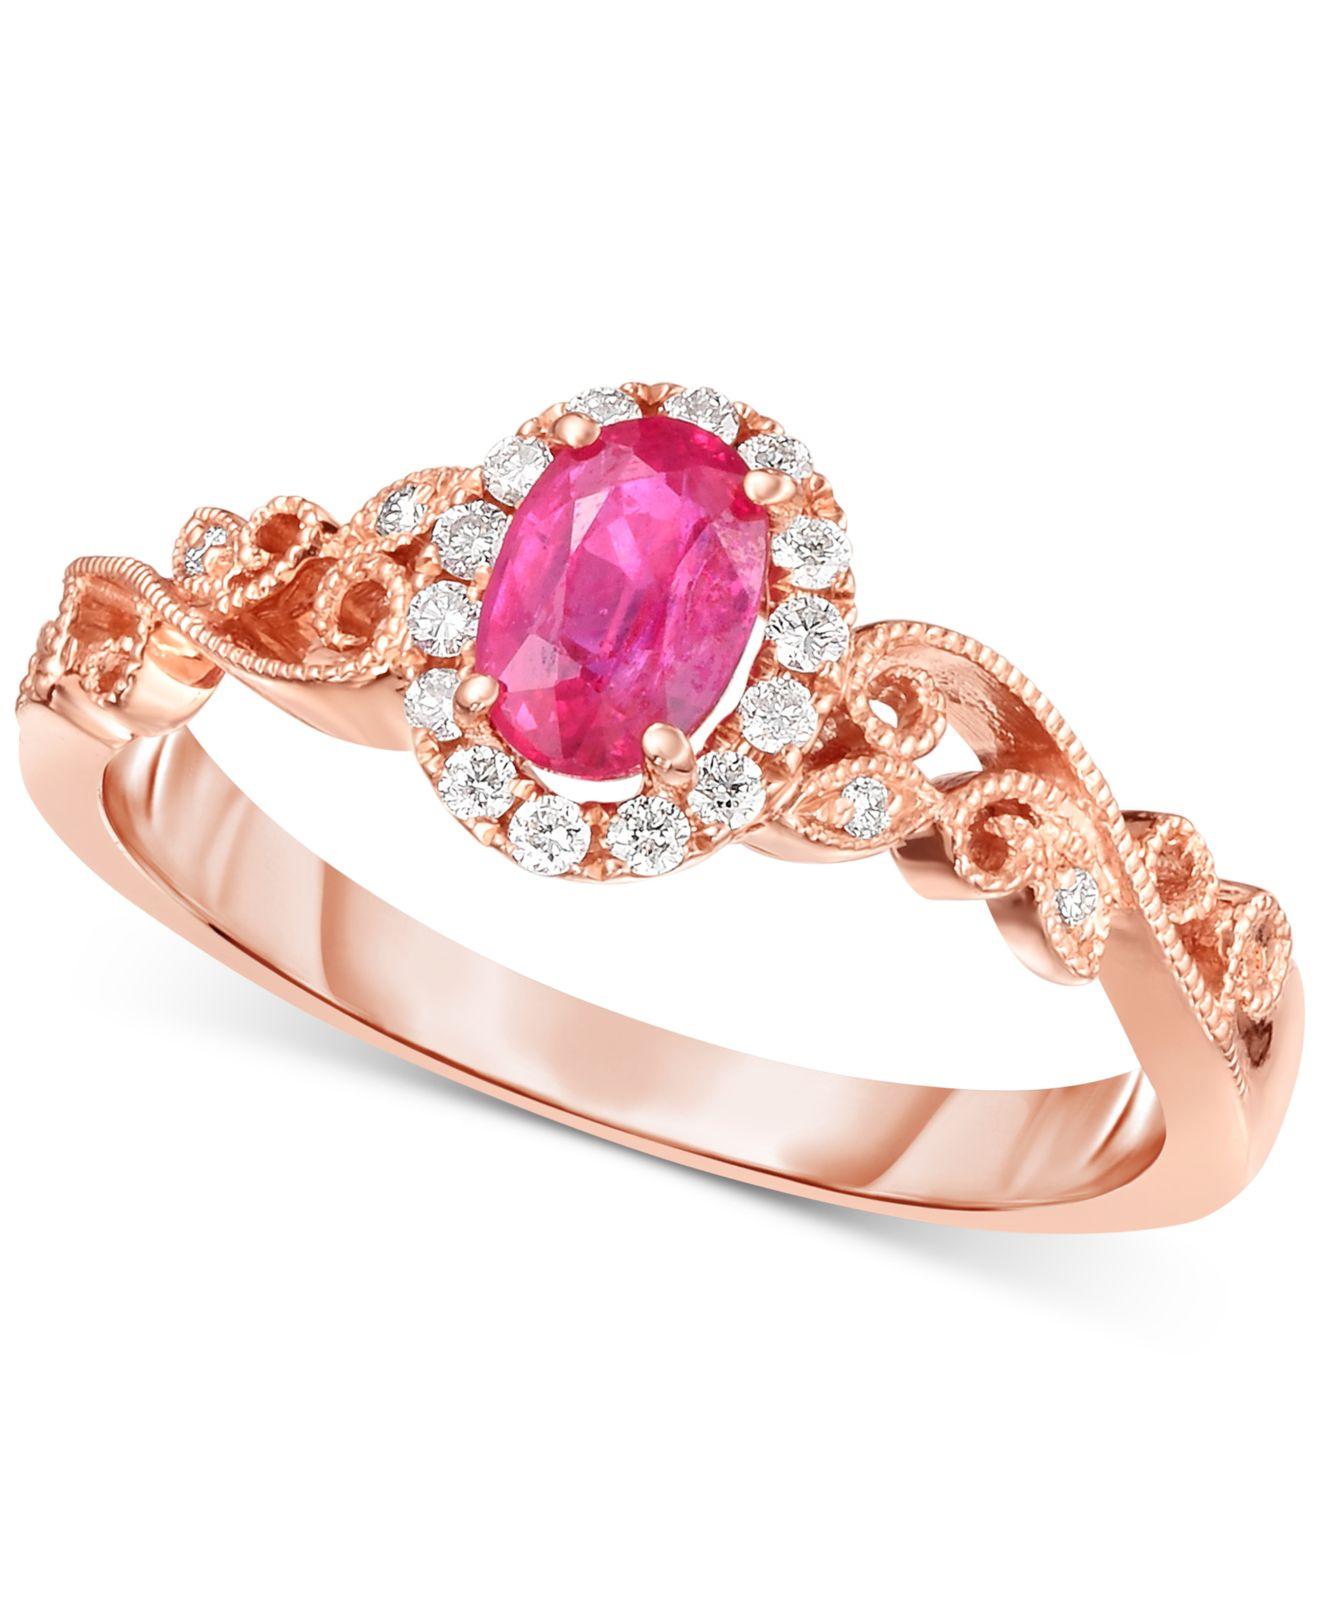 Lyst - Macy&#39;s Ruby (3/8 Ct. T.w.) & Diamond (1/8 Ct. T.w.) Ring In 14k Rose Gold in Red